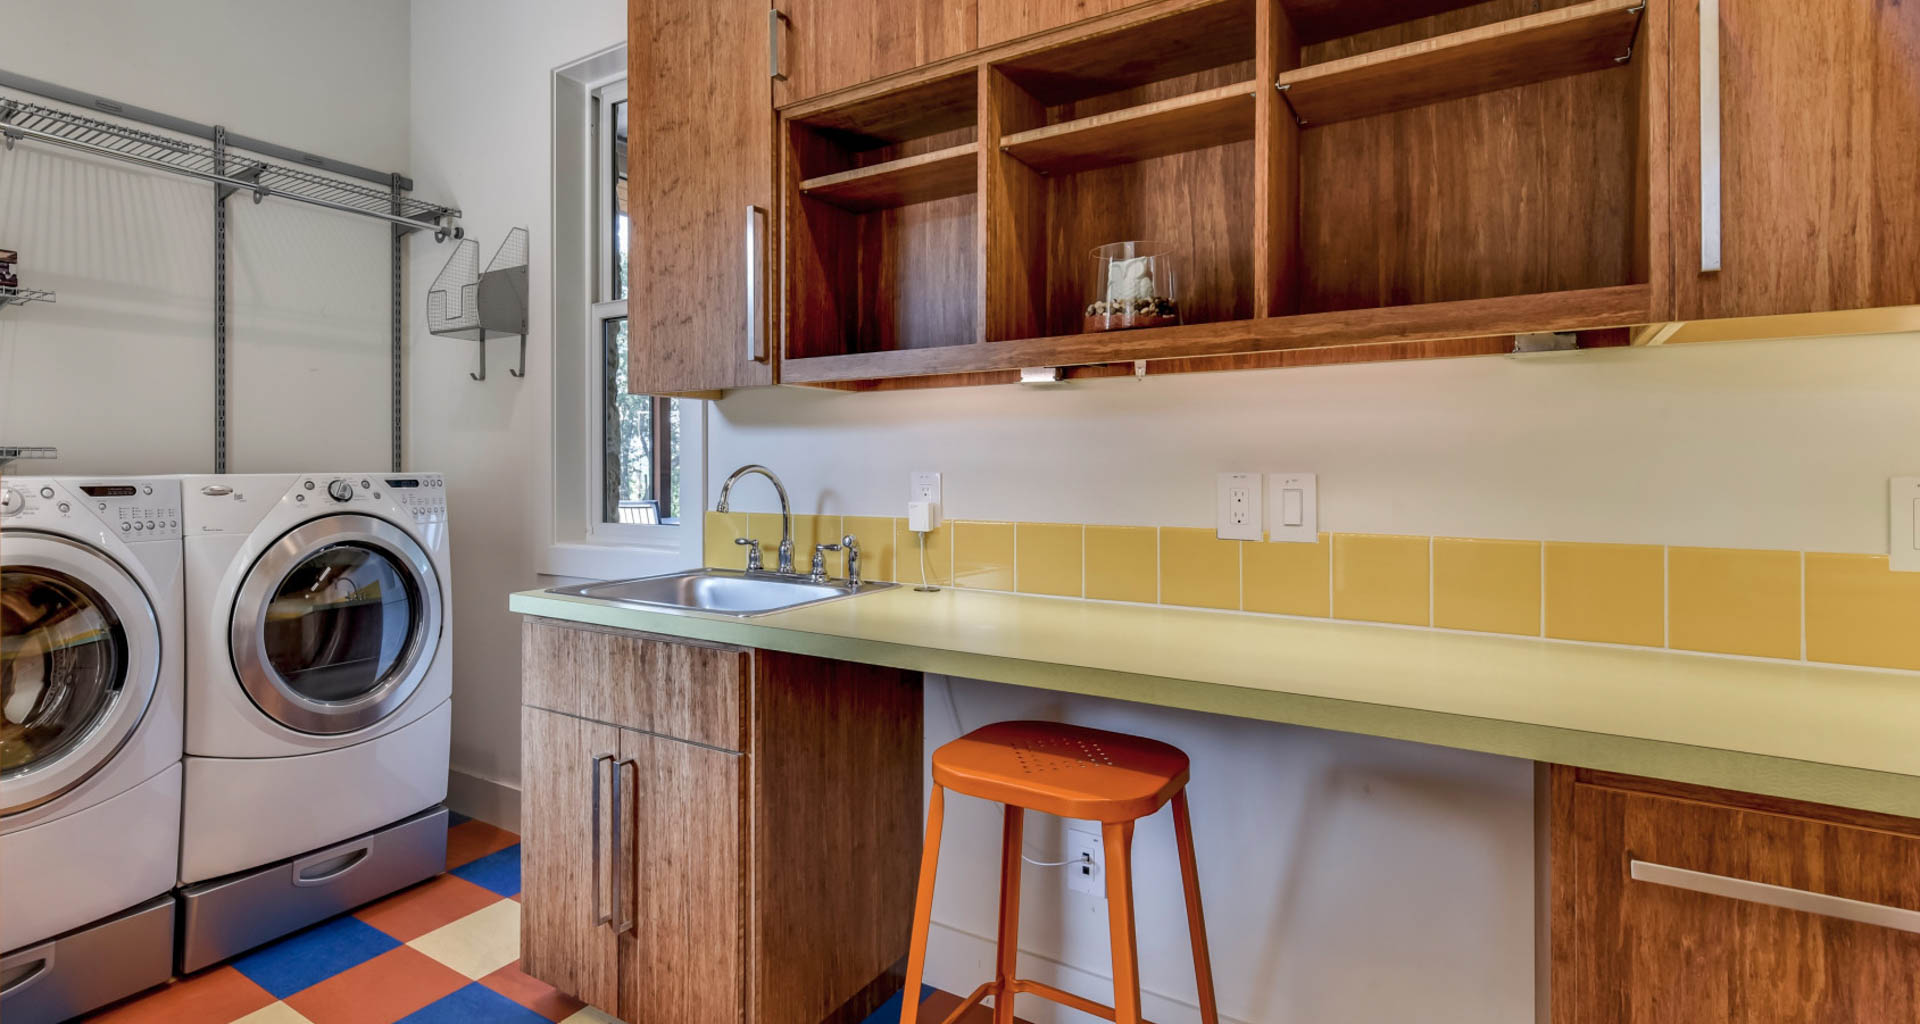 This laundry room easily doubles as a home office space with a built-in desktop and hidden file drawers. Plenty of electrical outlets enable easy recharging for laptops and smartphones. Image: TwistTours.